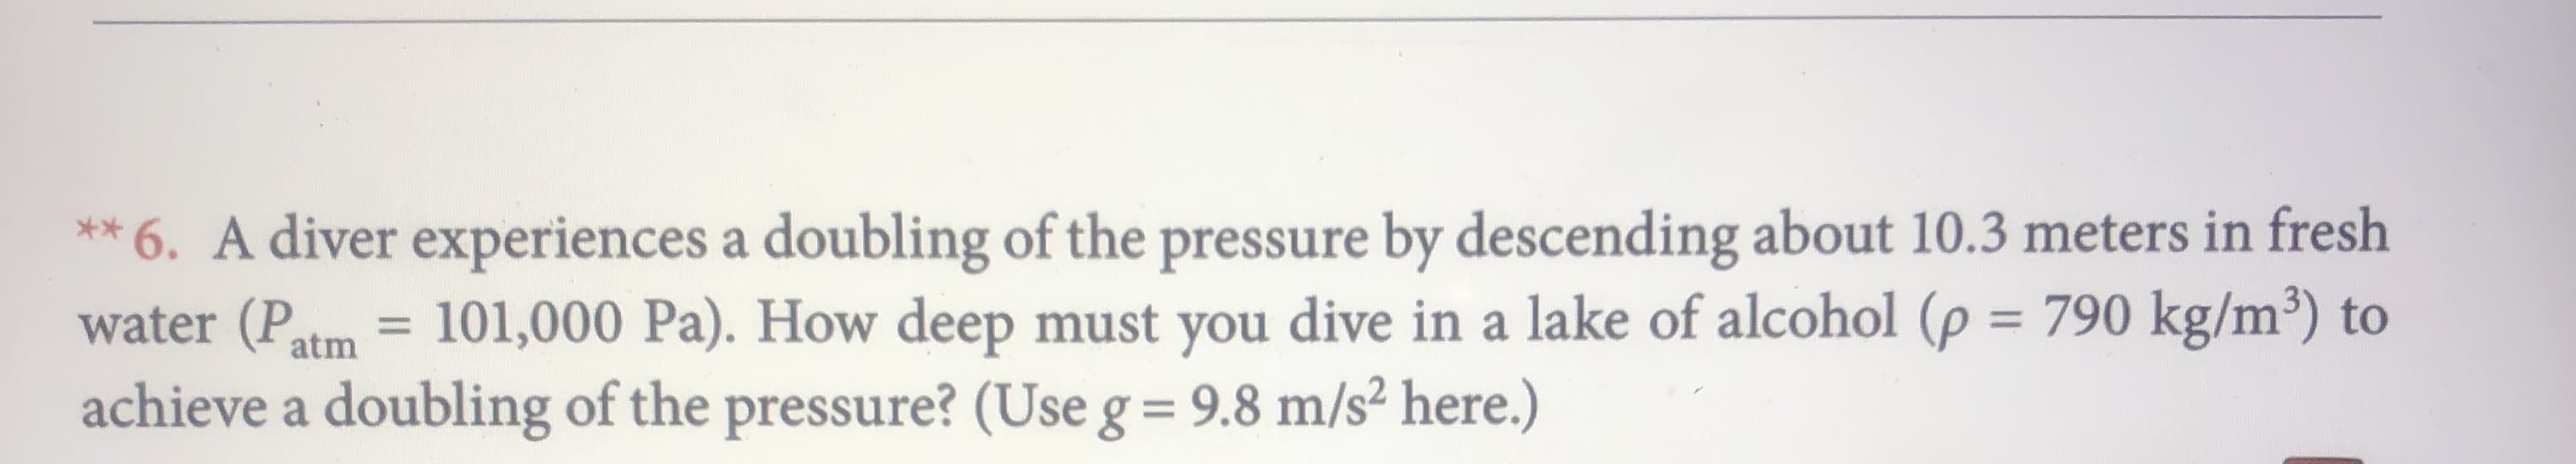 ** 6. A diver experiences a doubling of the pressure by descending about 10.3 meters in fresh
water (Patm 101,000 Pa). How deep must you dive in a lake of alcohol (p 790 kg/m3) to
achieve a doubling of the pressure? (Use g = 9.8 m/s2 here.)
